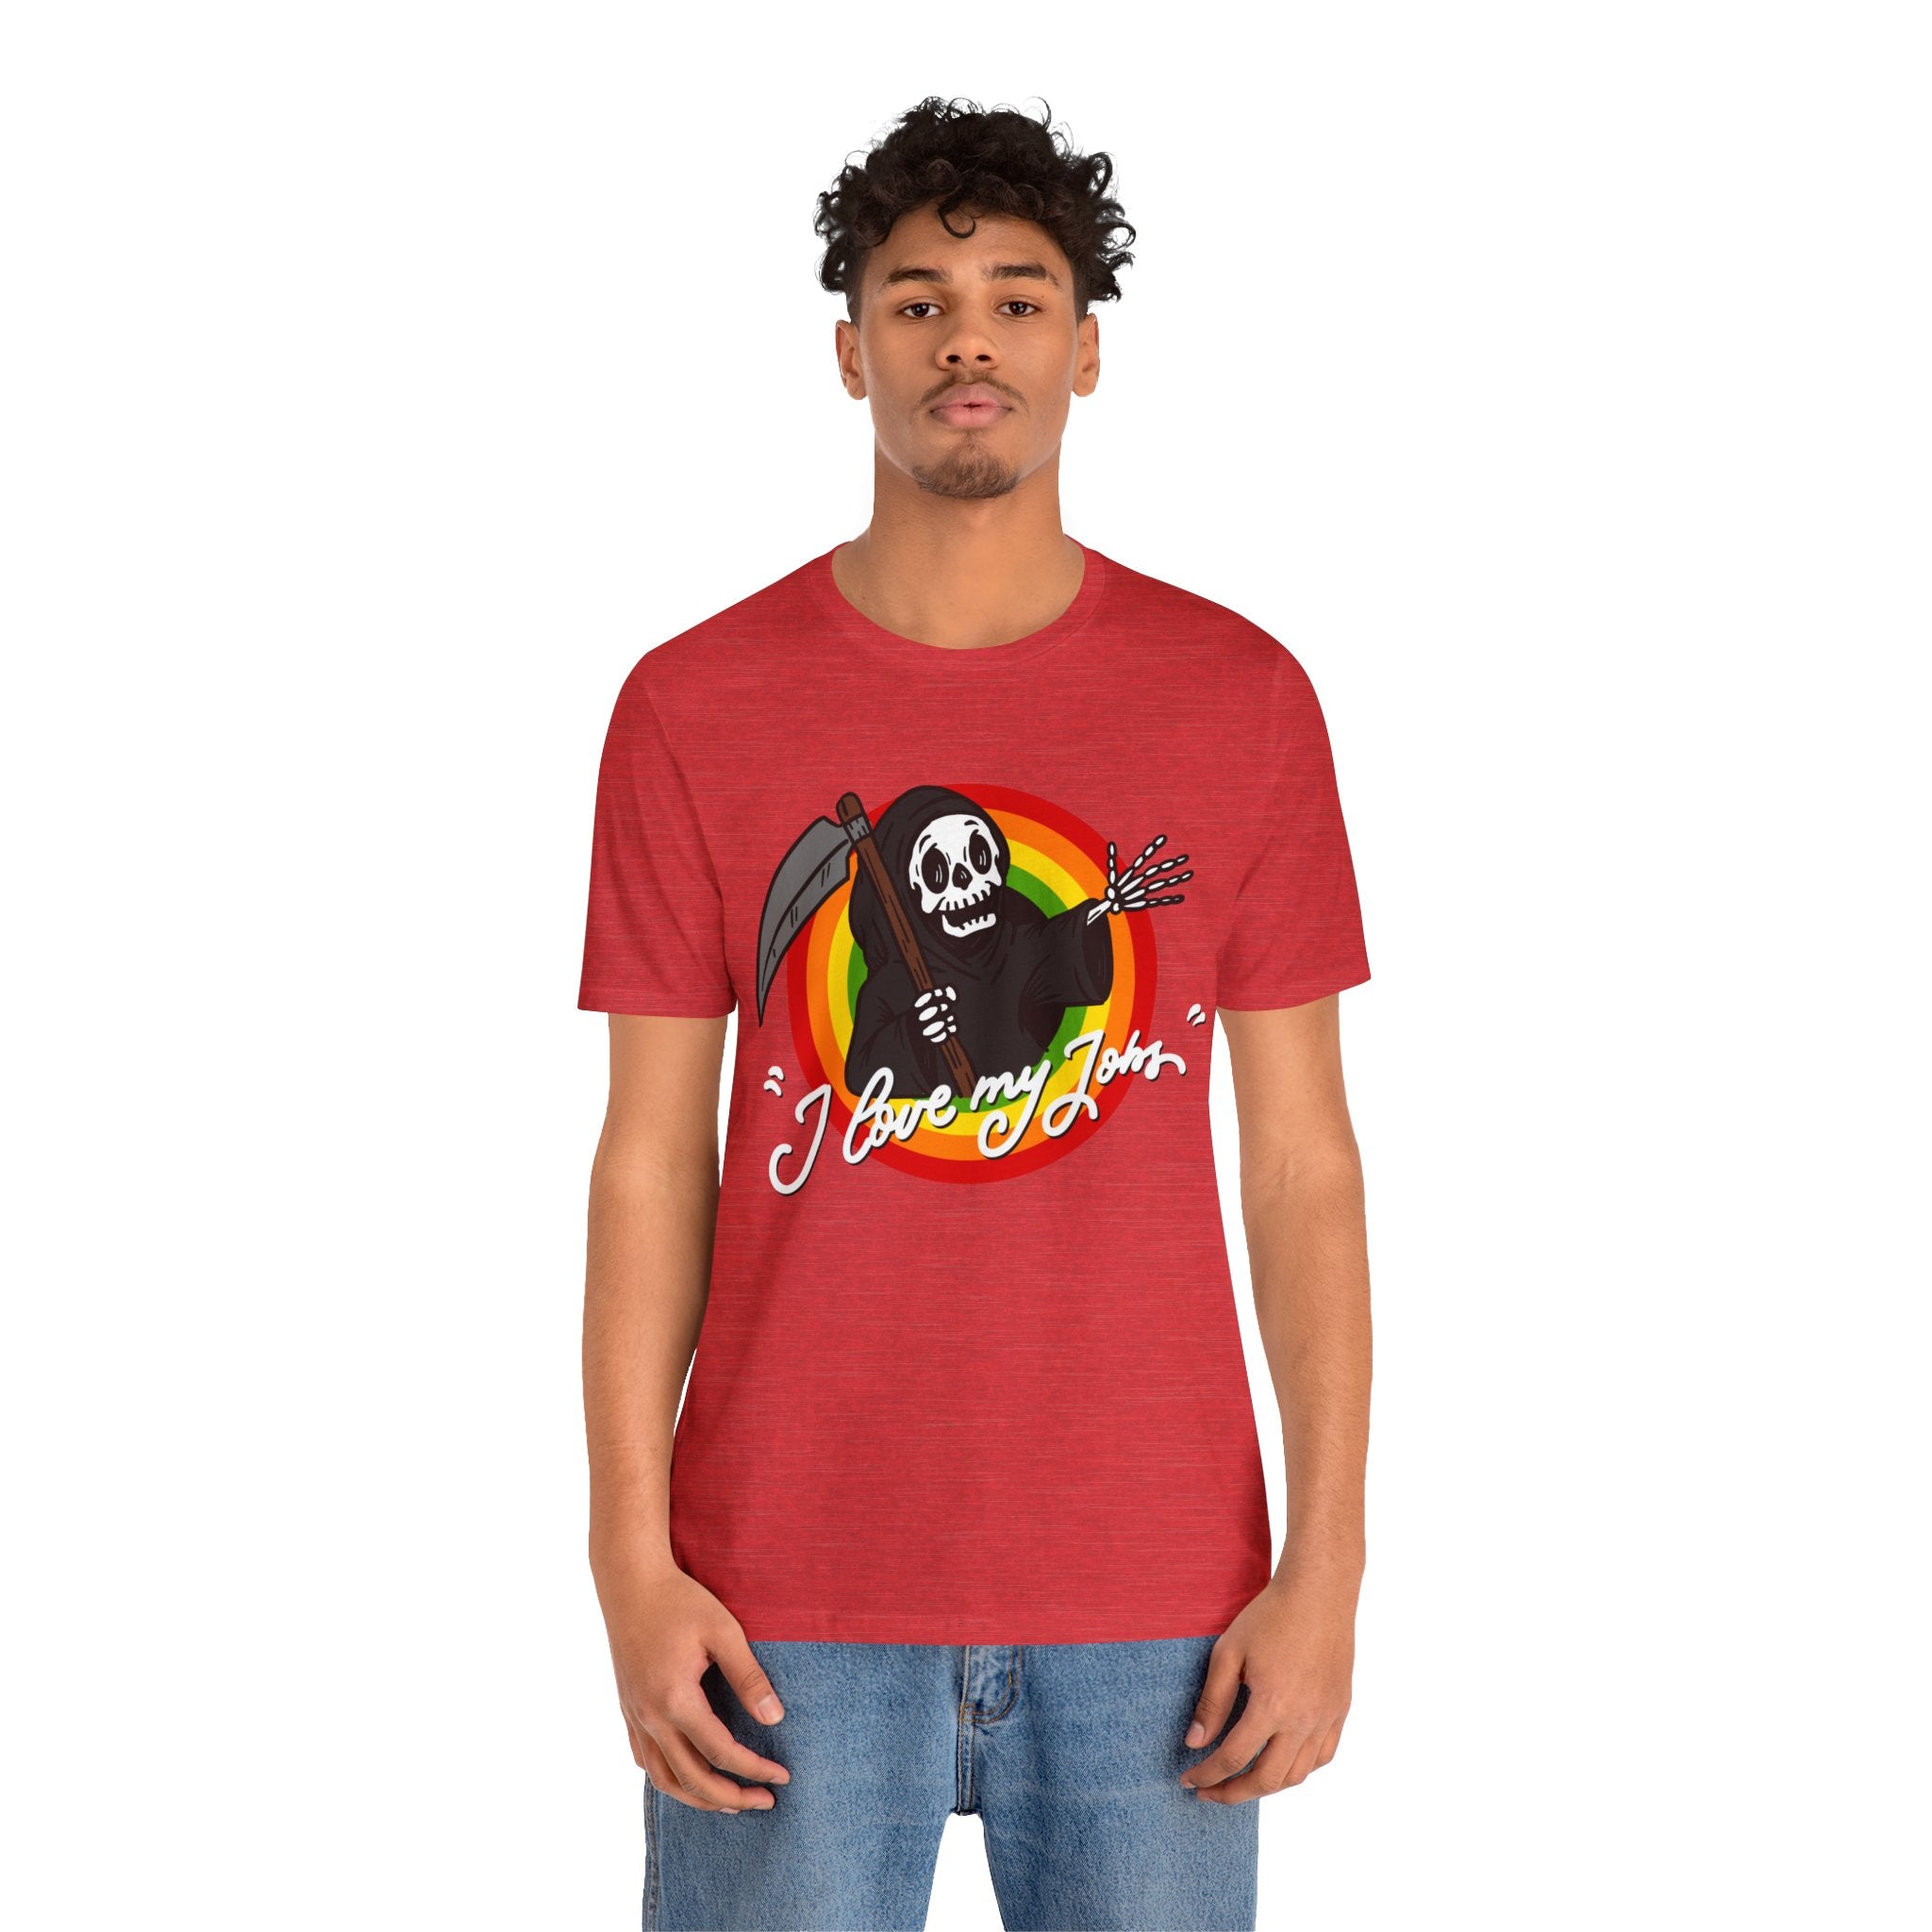 Sentence with product name: A young man wearing a red Love My Jobs T-Shirt with a skull, crossbones, and "Love My Job" graphic, paired with blue jeans, standing against a plain background.